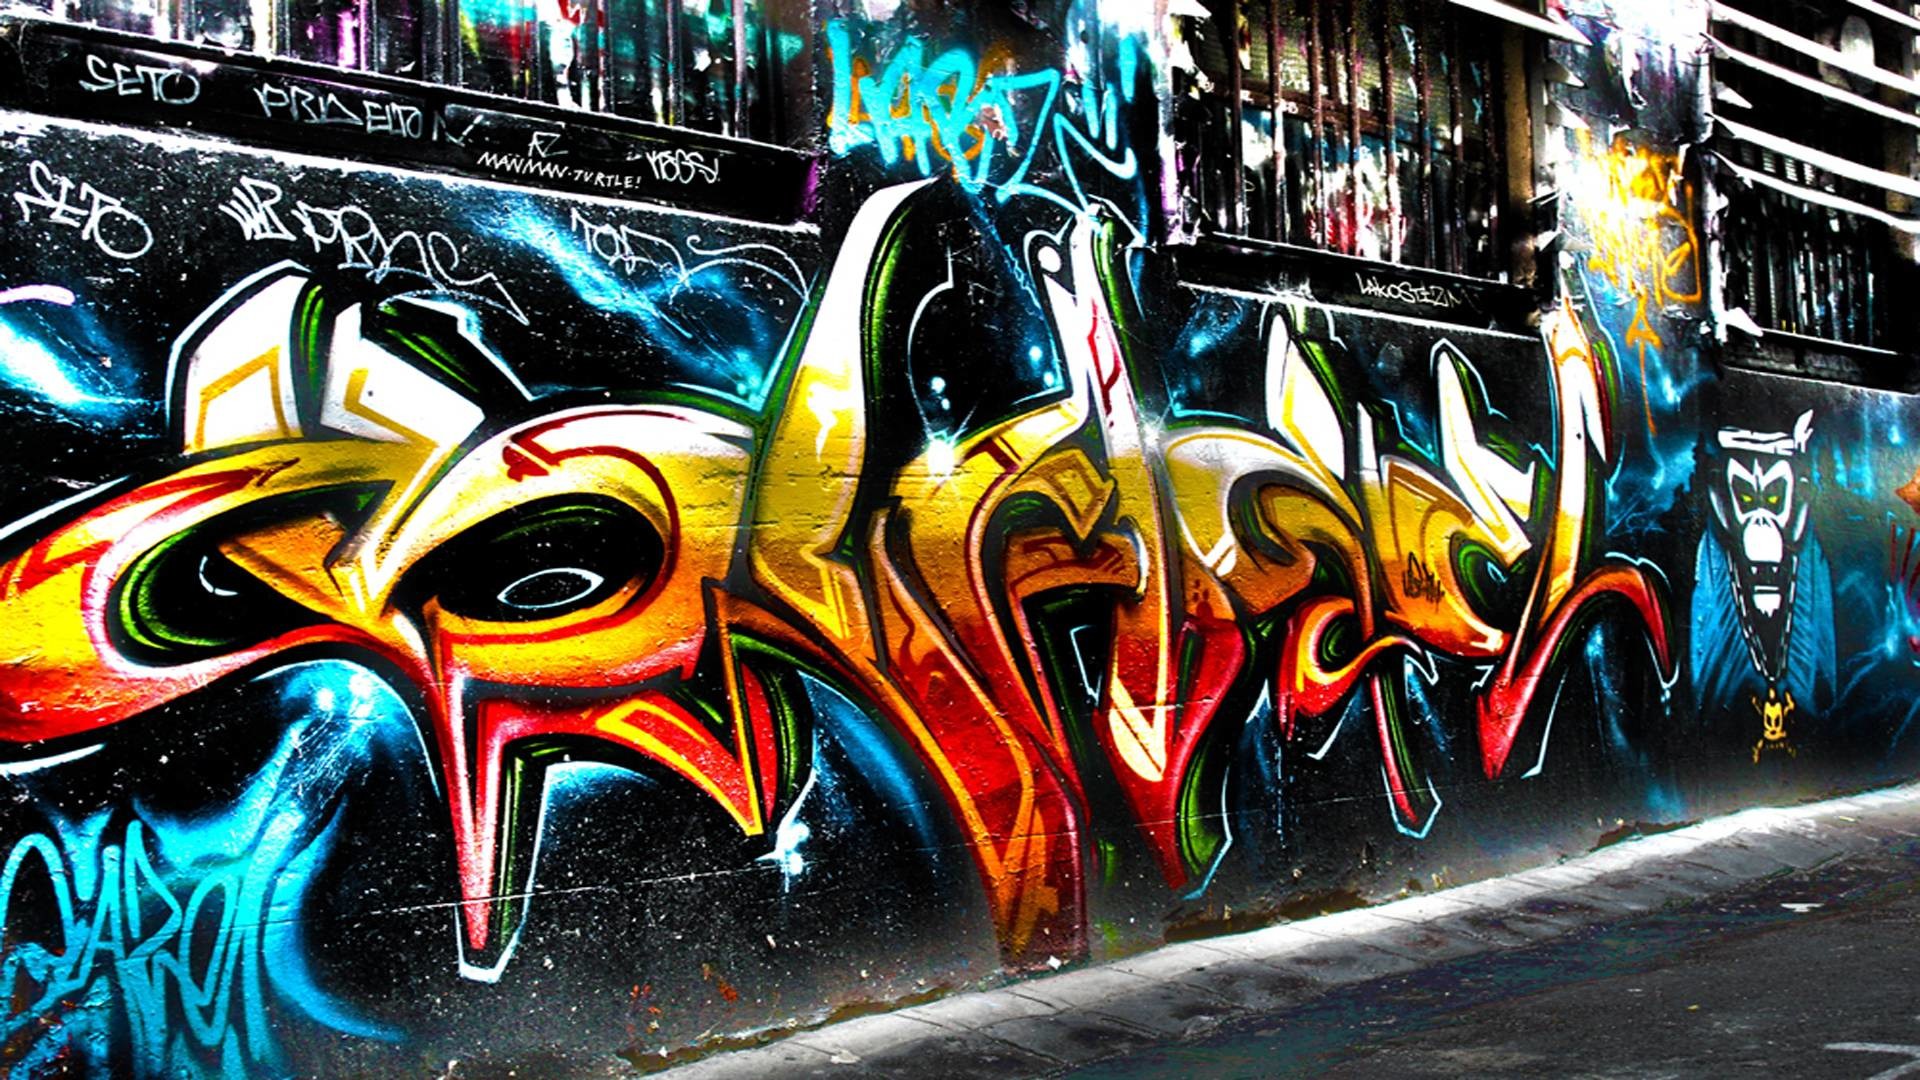 1920x1080 220621 graffiti wallpaper HD free wallpapers backgrounds images .